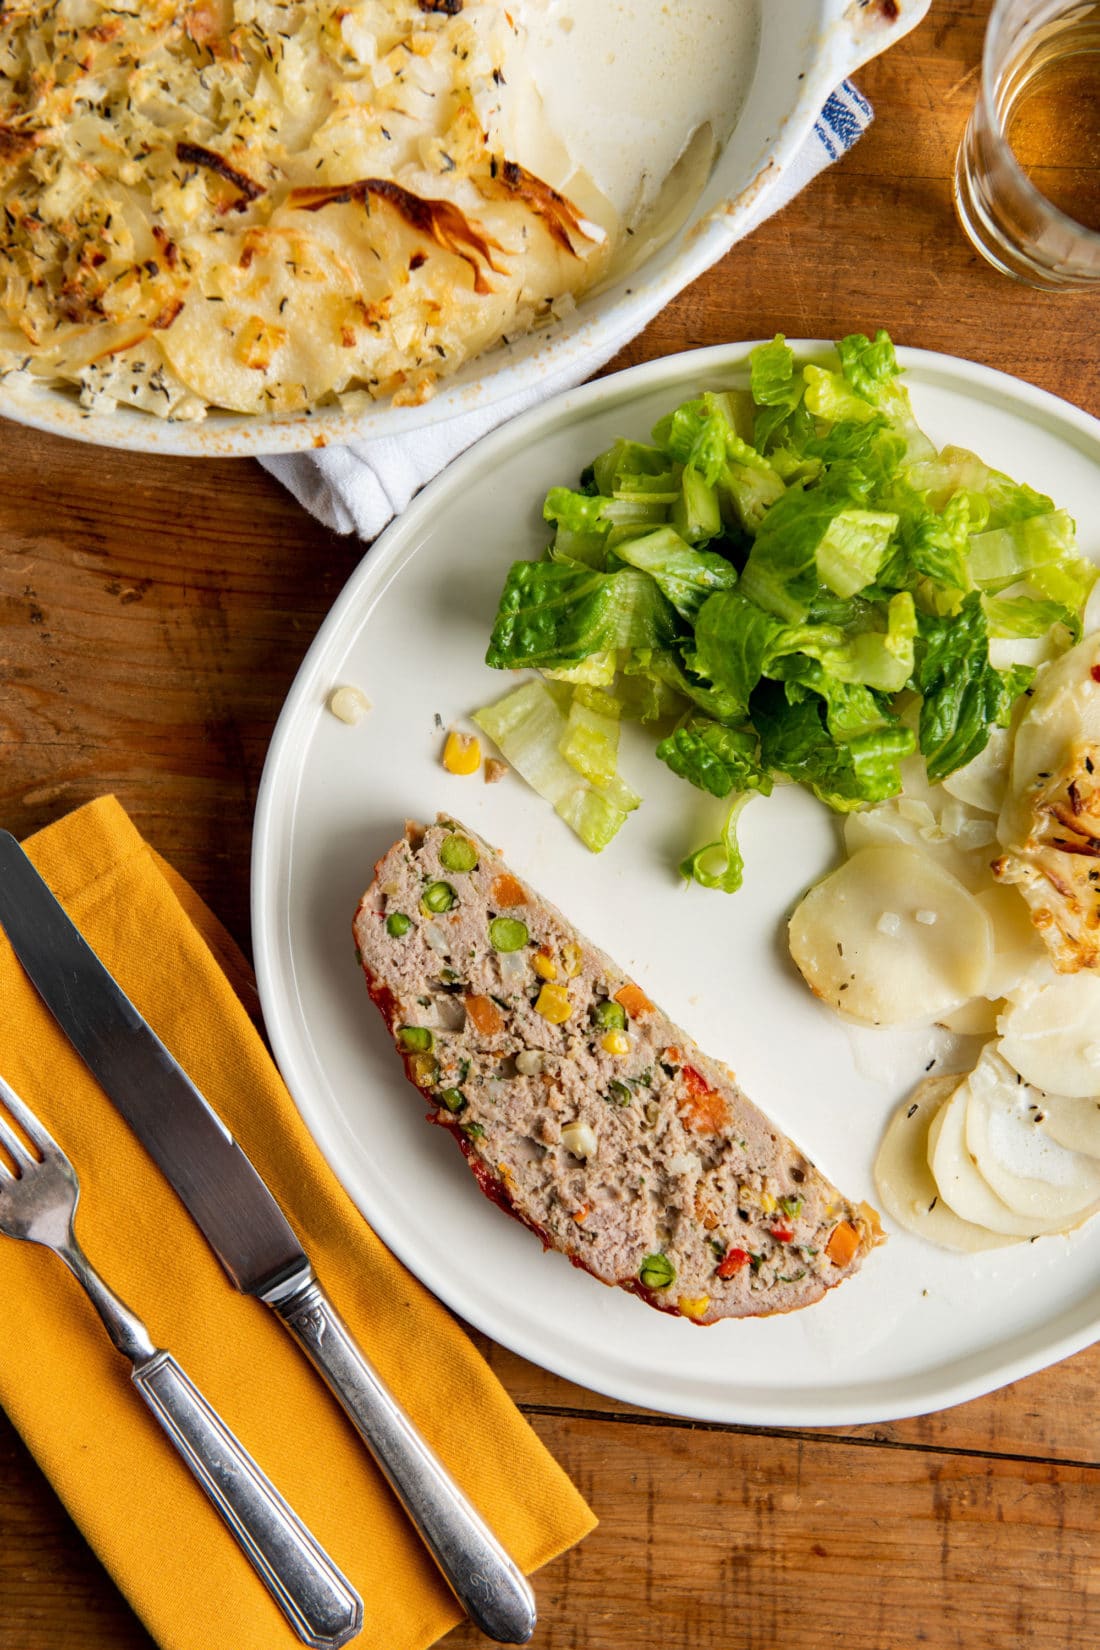 Slice of Vegetable Studded Turkey Meatloaf on a plate with potatoes and salad.